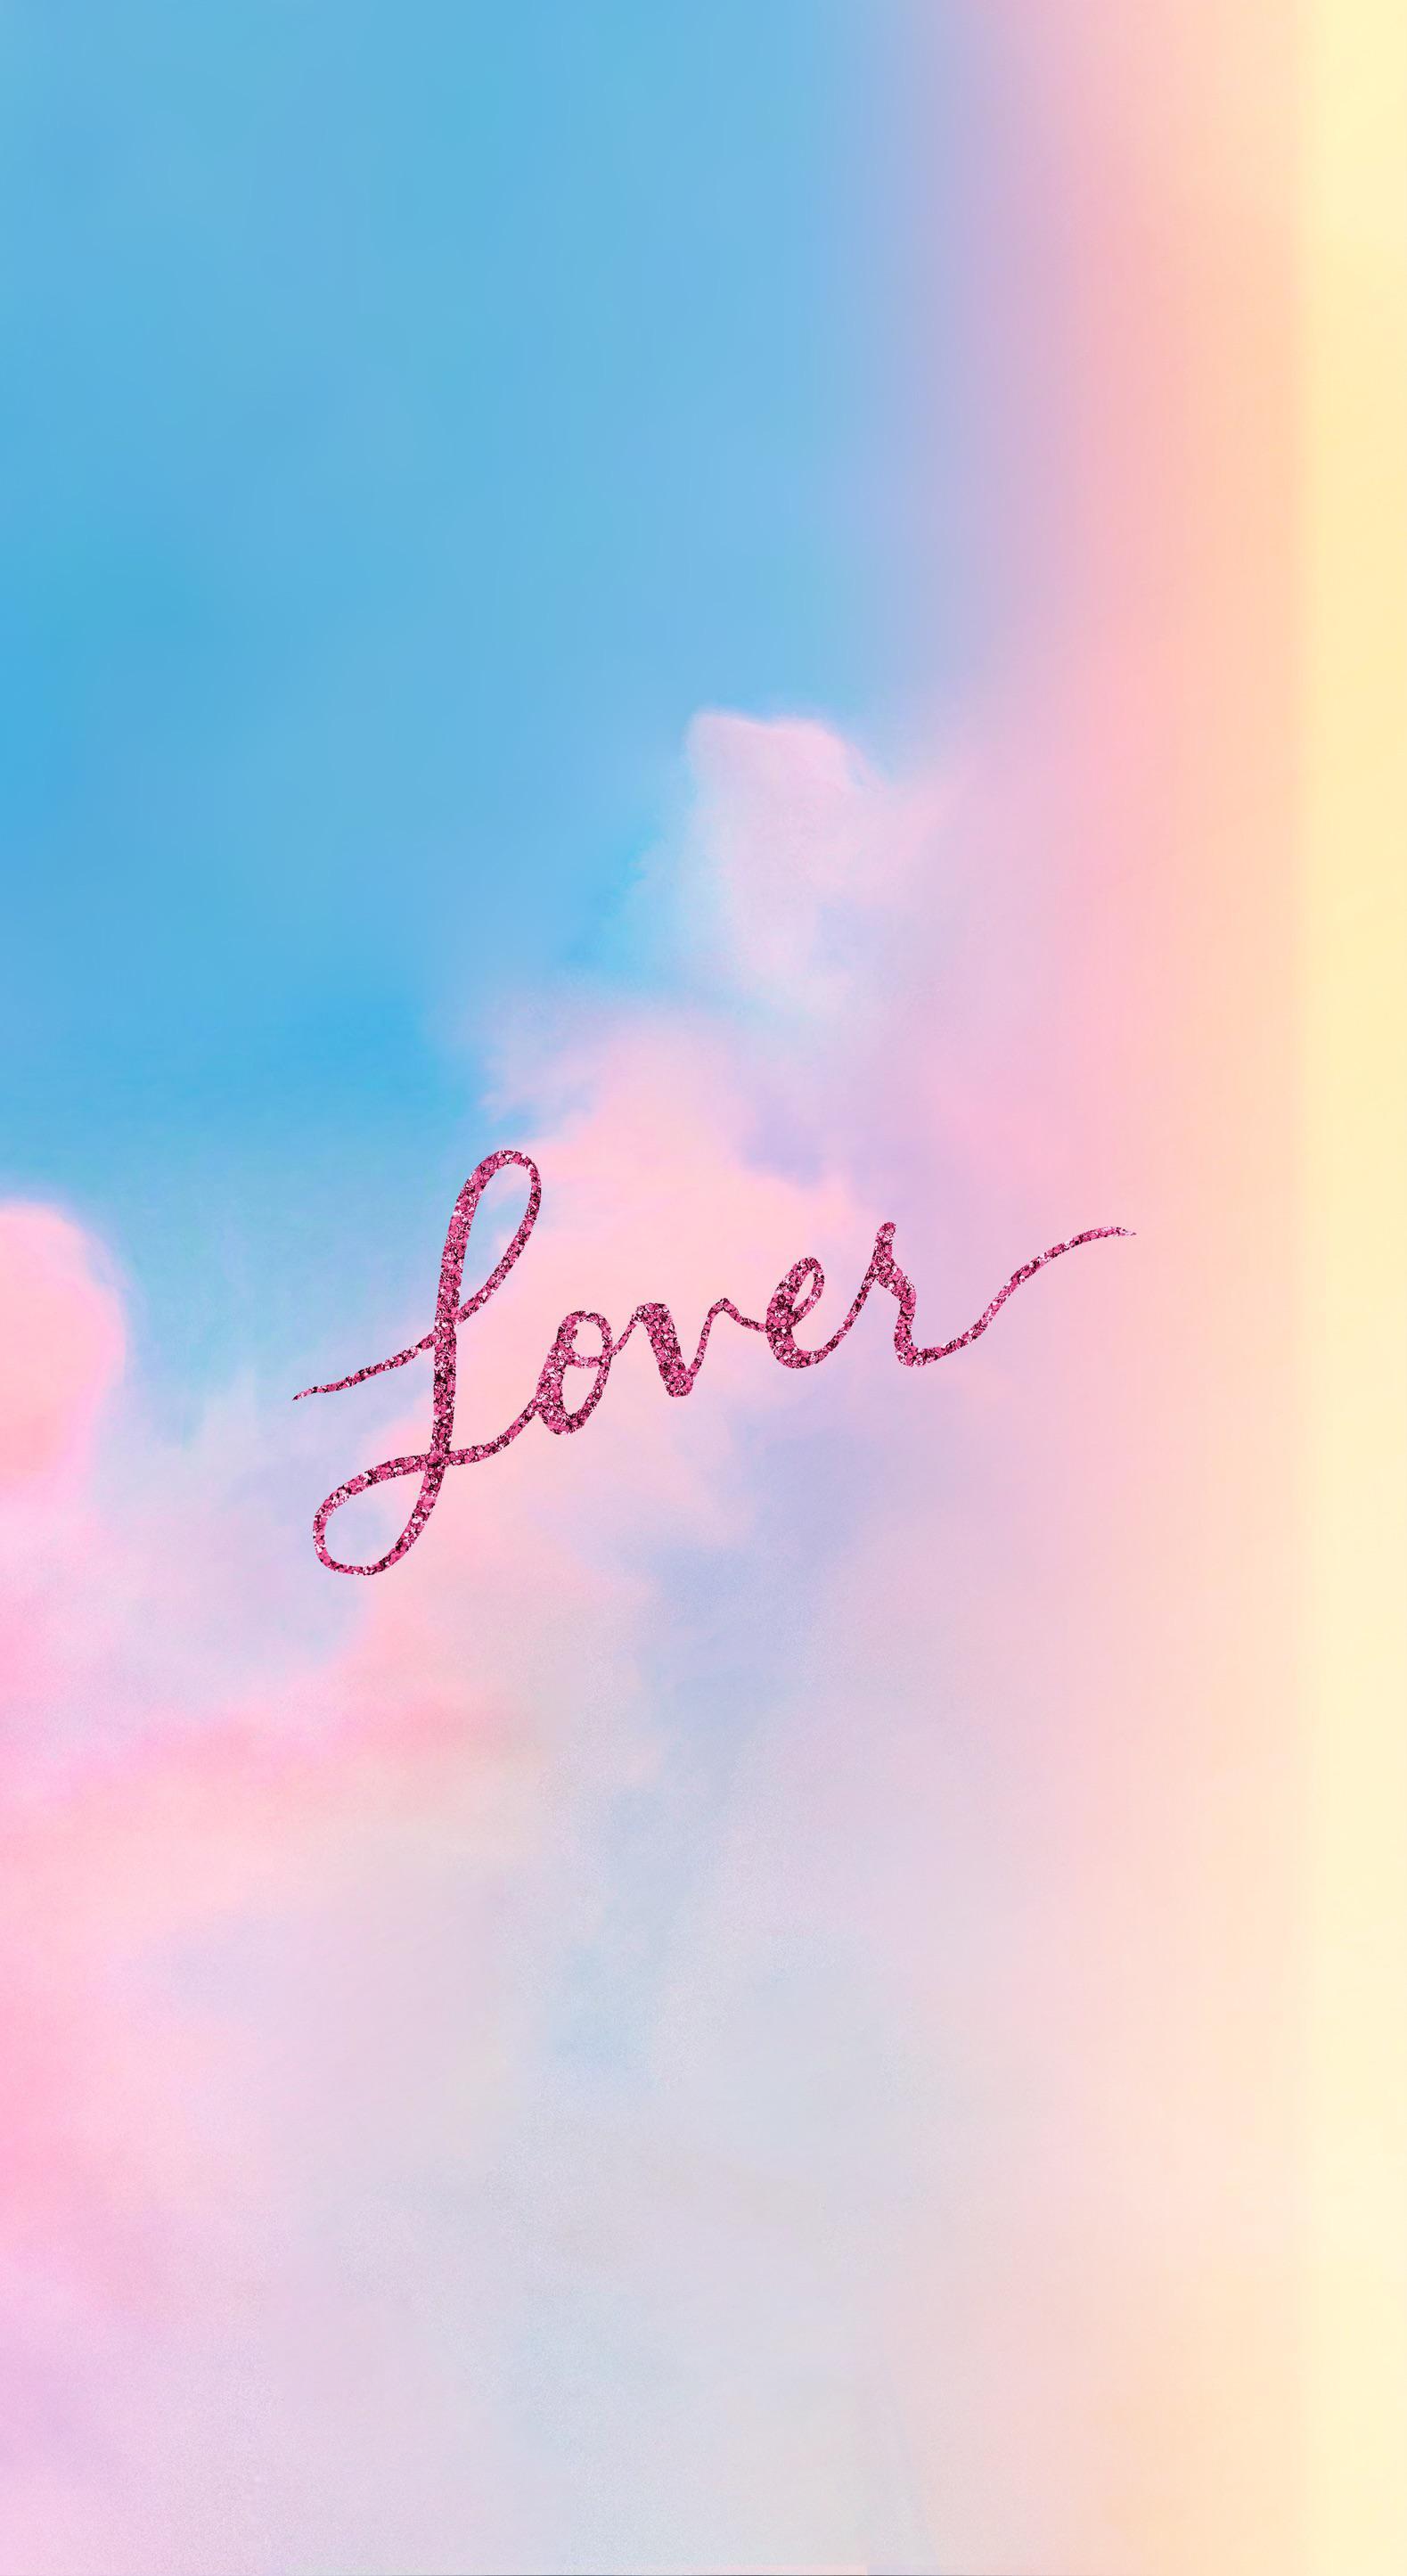 Hey kids, editing is fun! Made this wallpaper with the Lover